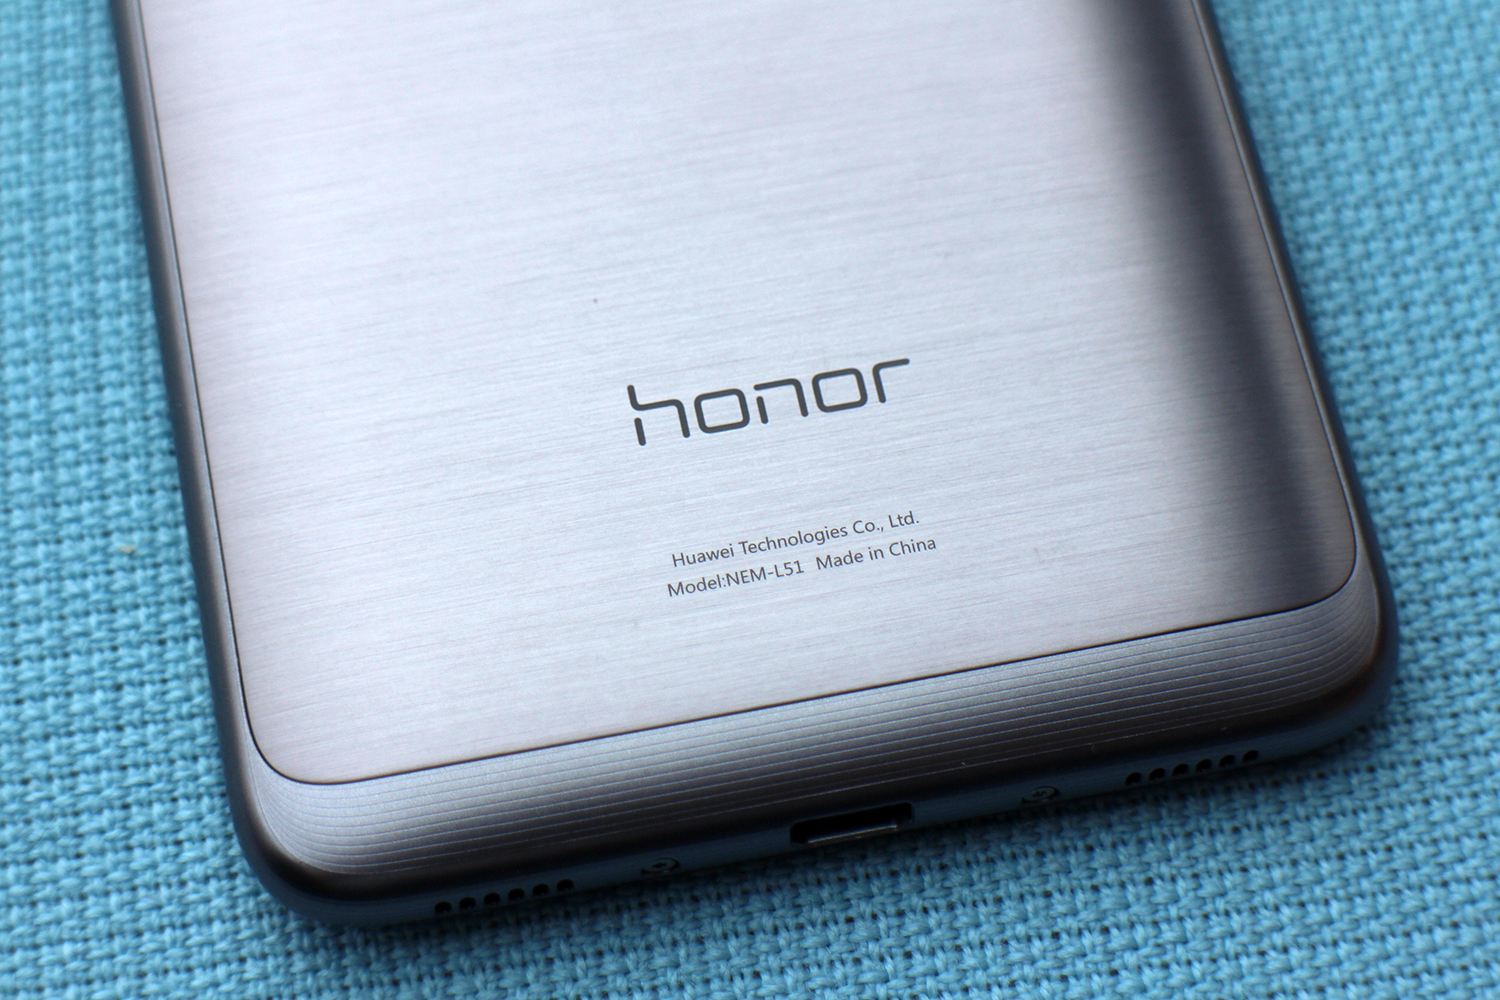 Honor Tablet 8 leaks with a 2K display and a Qualcomm Snapdragon